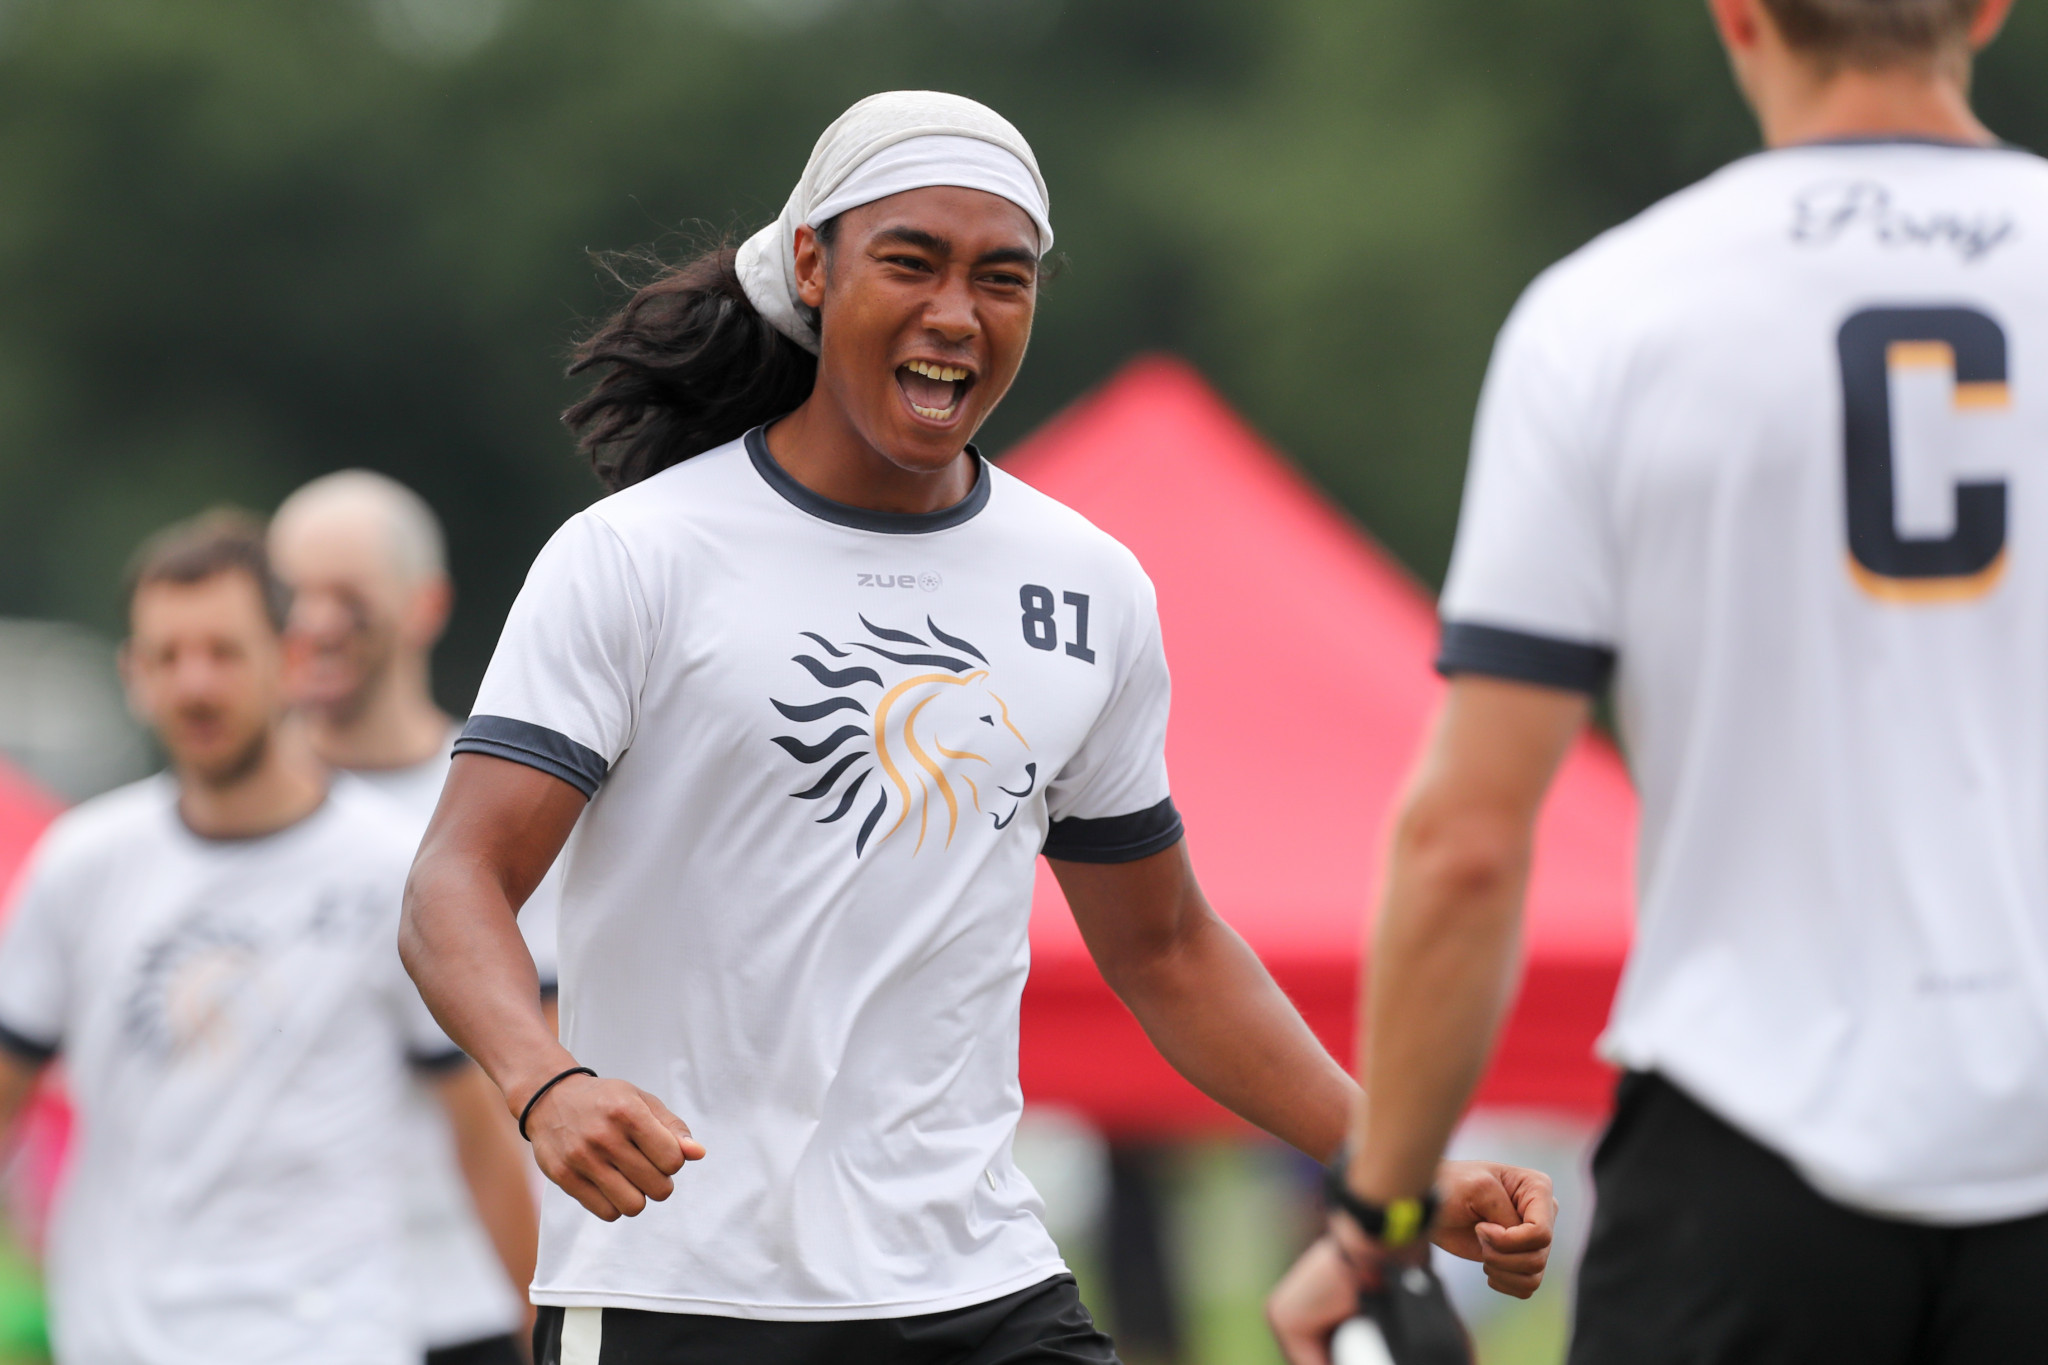 PoNY's Antoine Davis scored one goal in the semi-final fixture against Clapham Ultimate ©Paul Rutherford for UltiPhotos